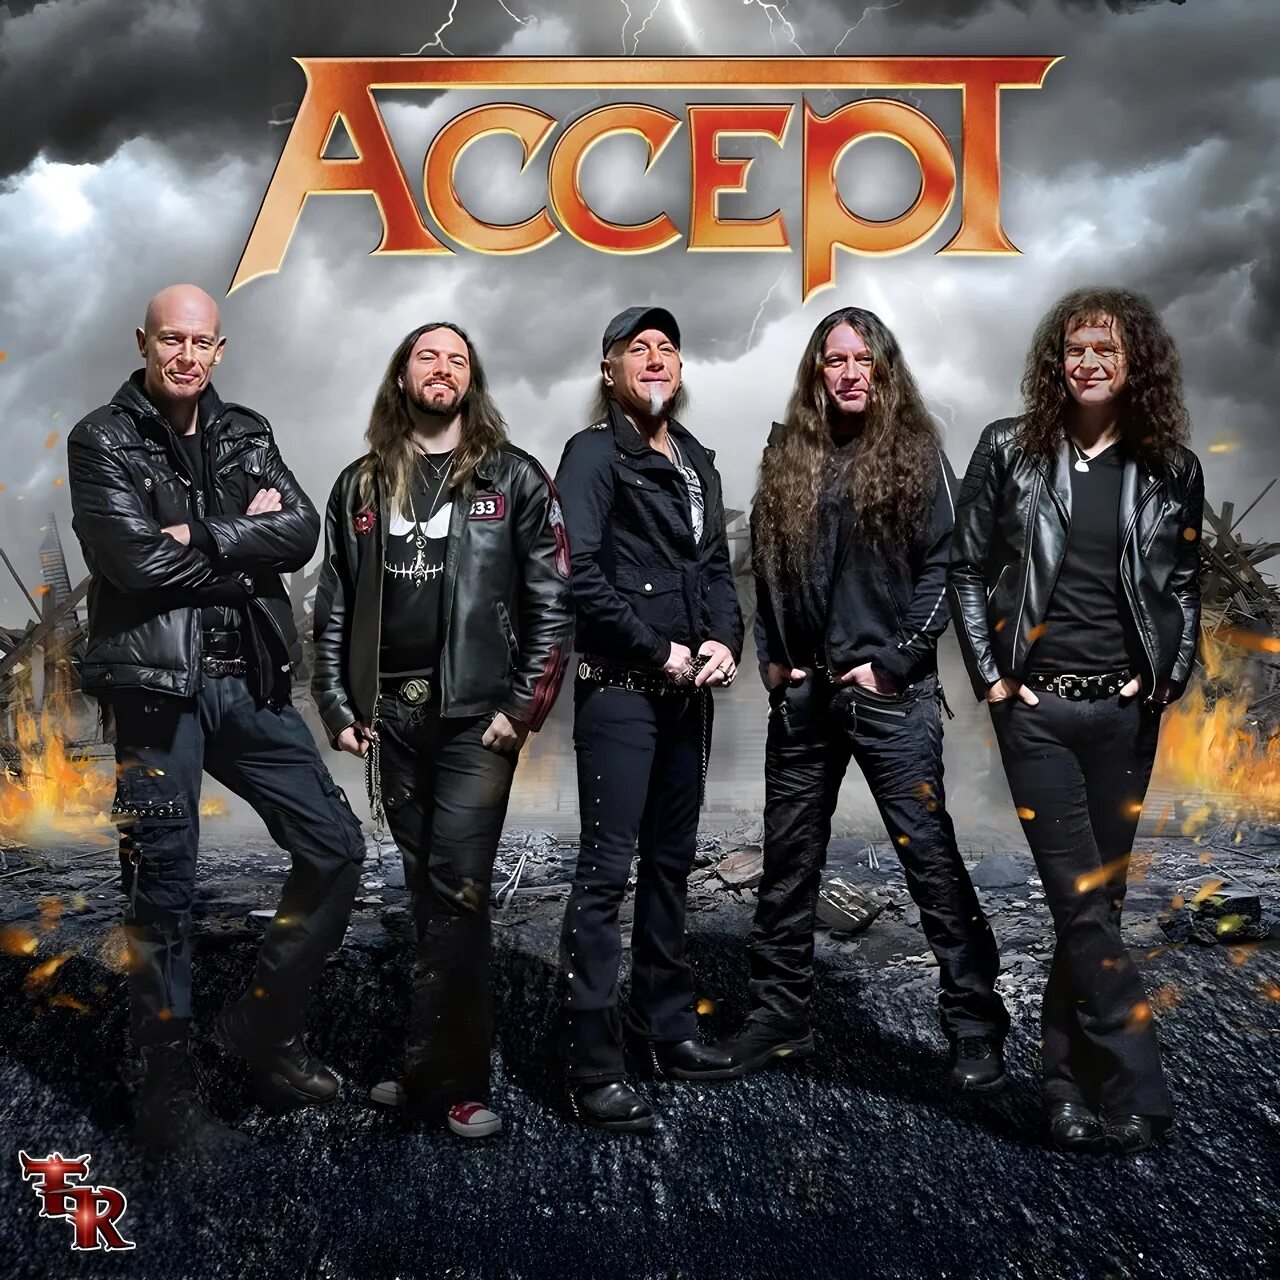 Http accept. Accept the Rise of Chaos 2017. Accept 2017 the Rise of Chaos обложка. Группа accept 2019. Группа accept обложки.